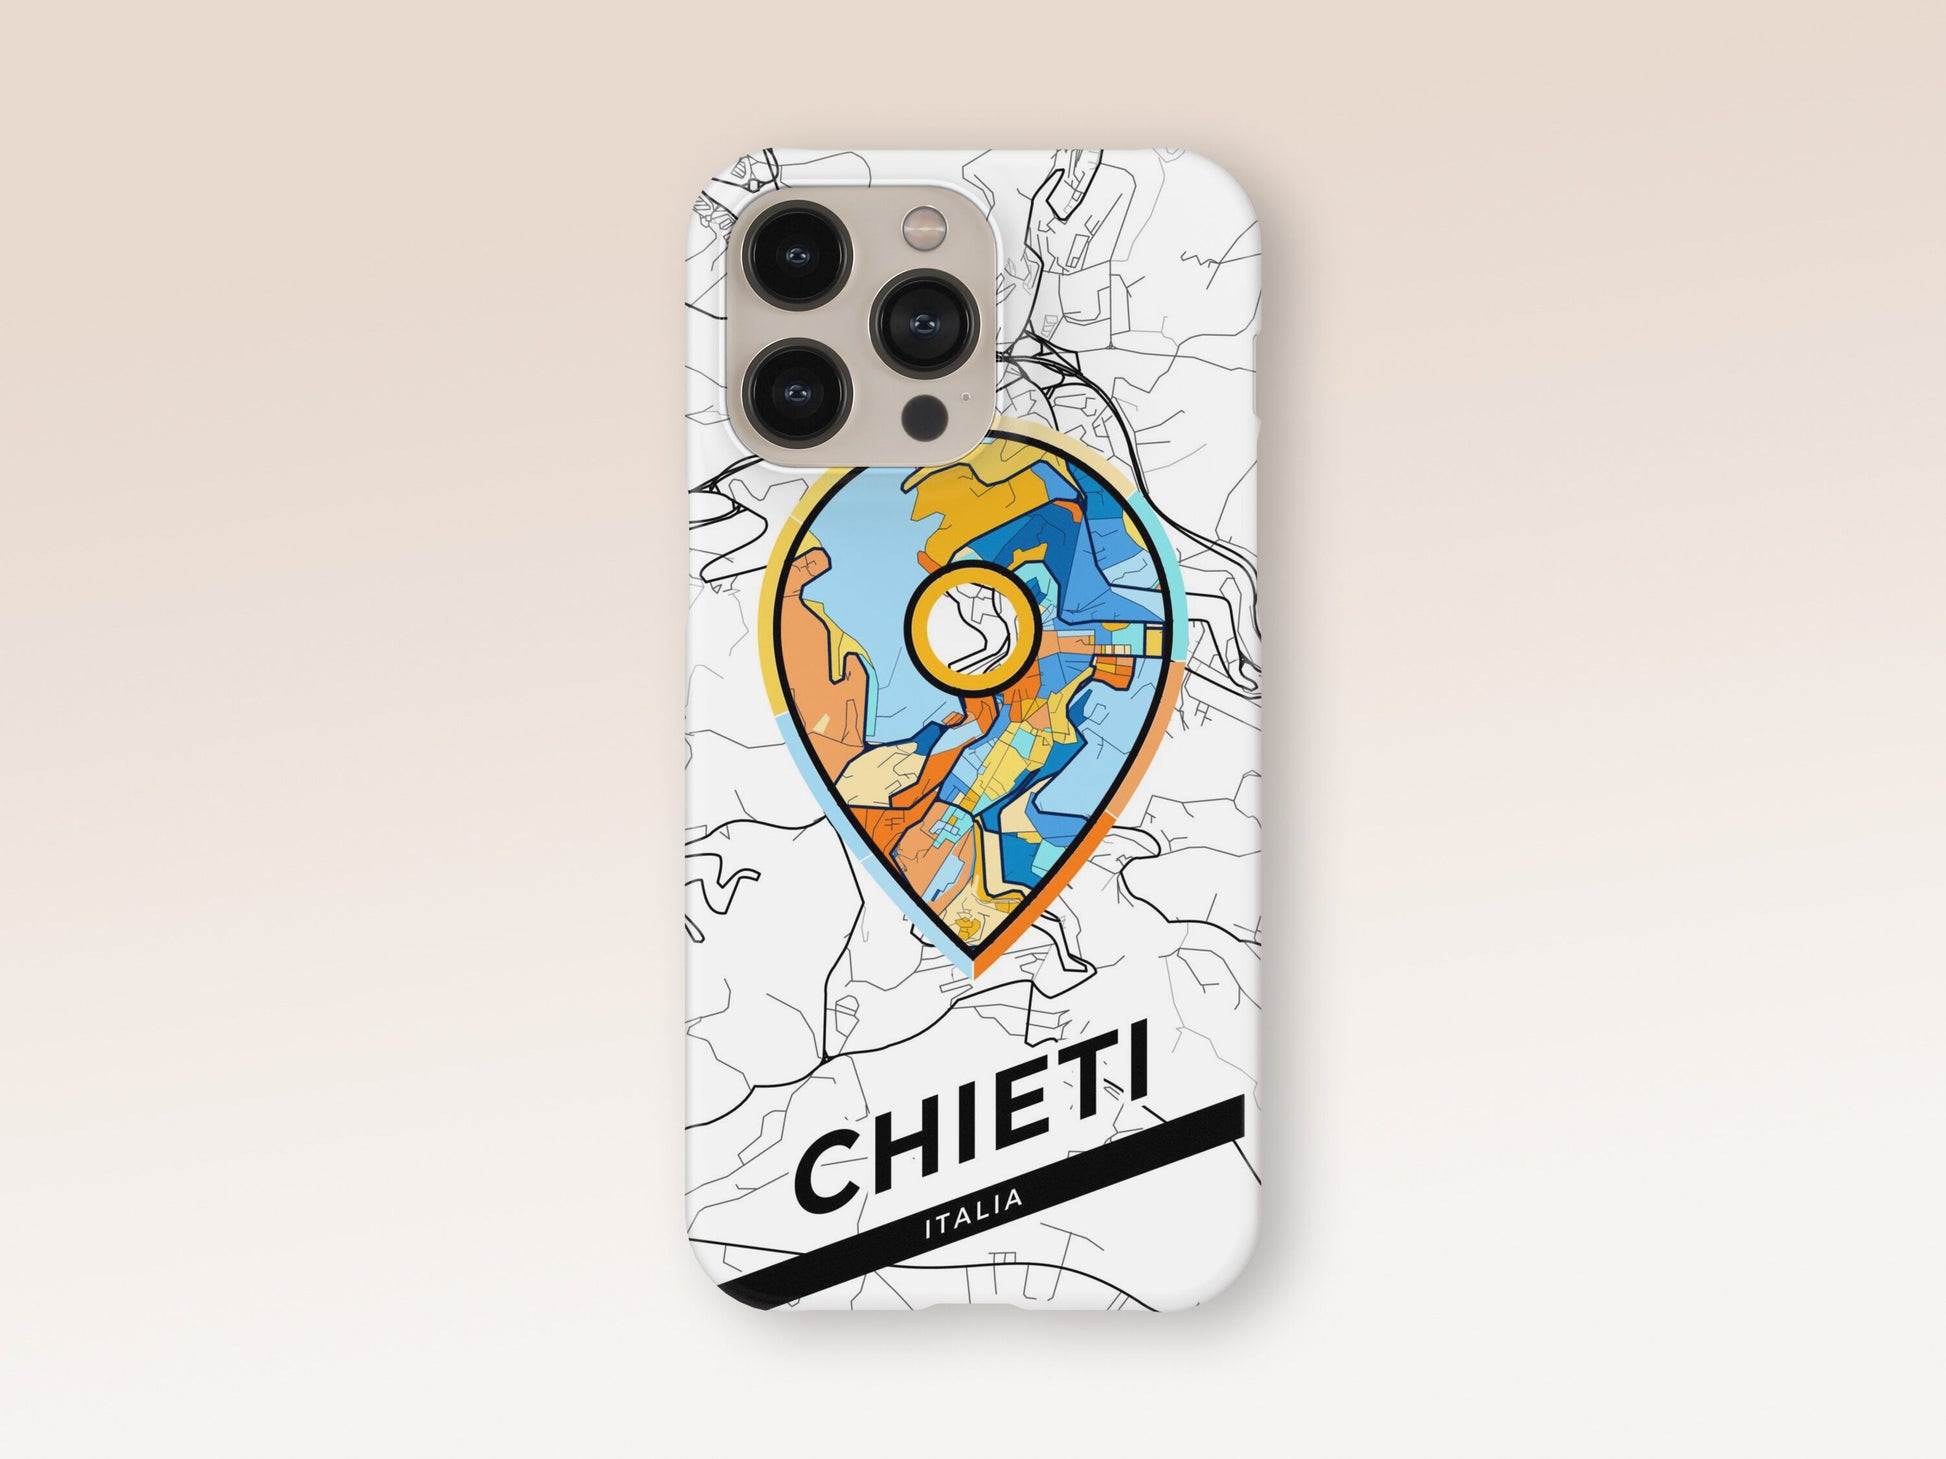 Chieti Italy slim phone case with colorful icon. Birthday, wedding or housewarming gift. Couple match cases. 1